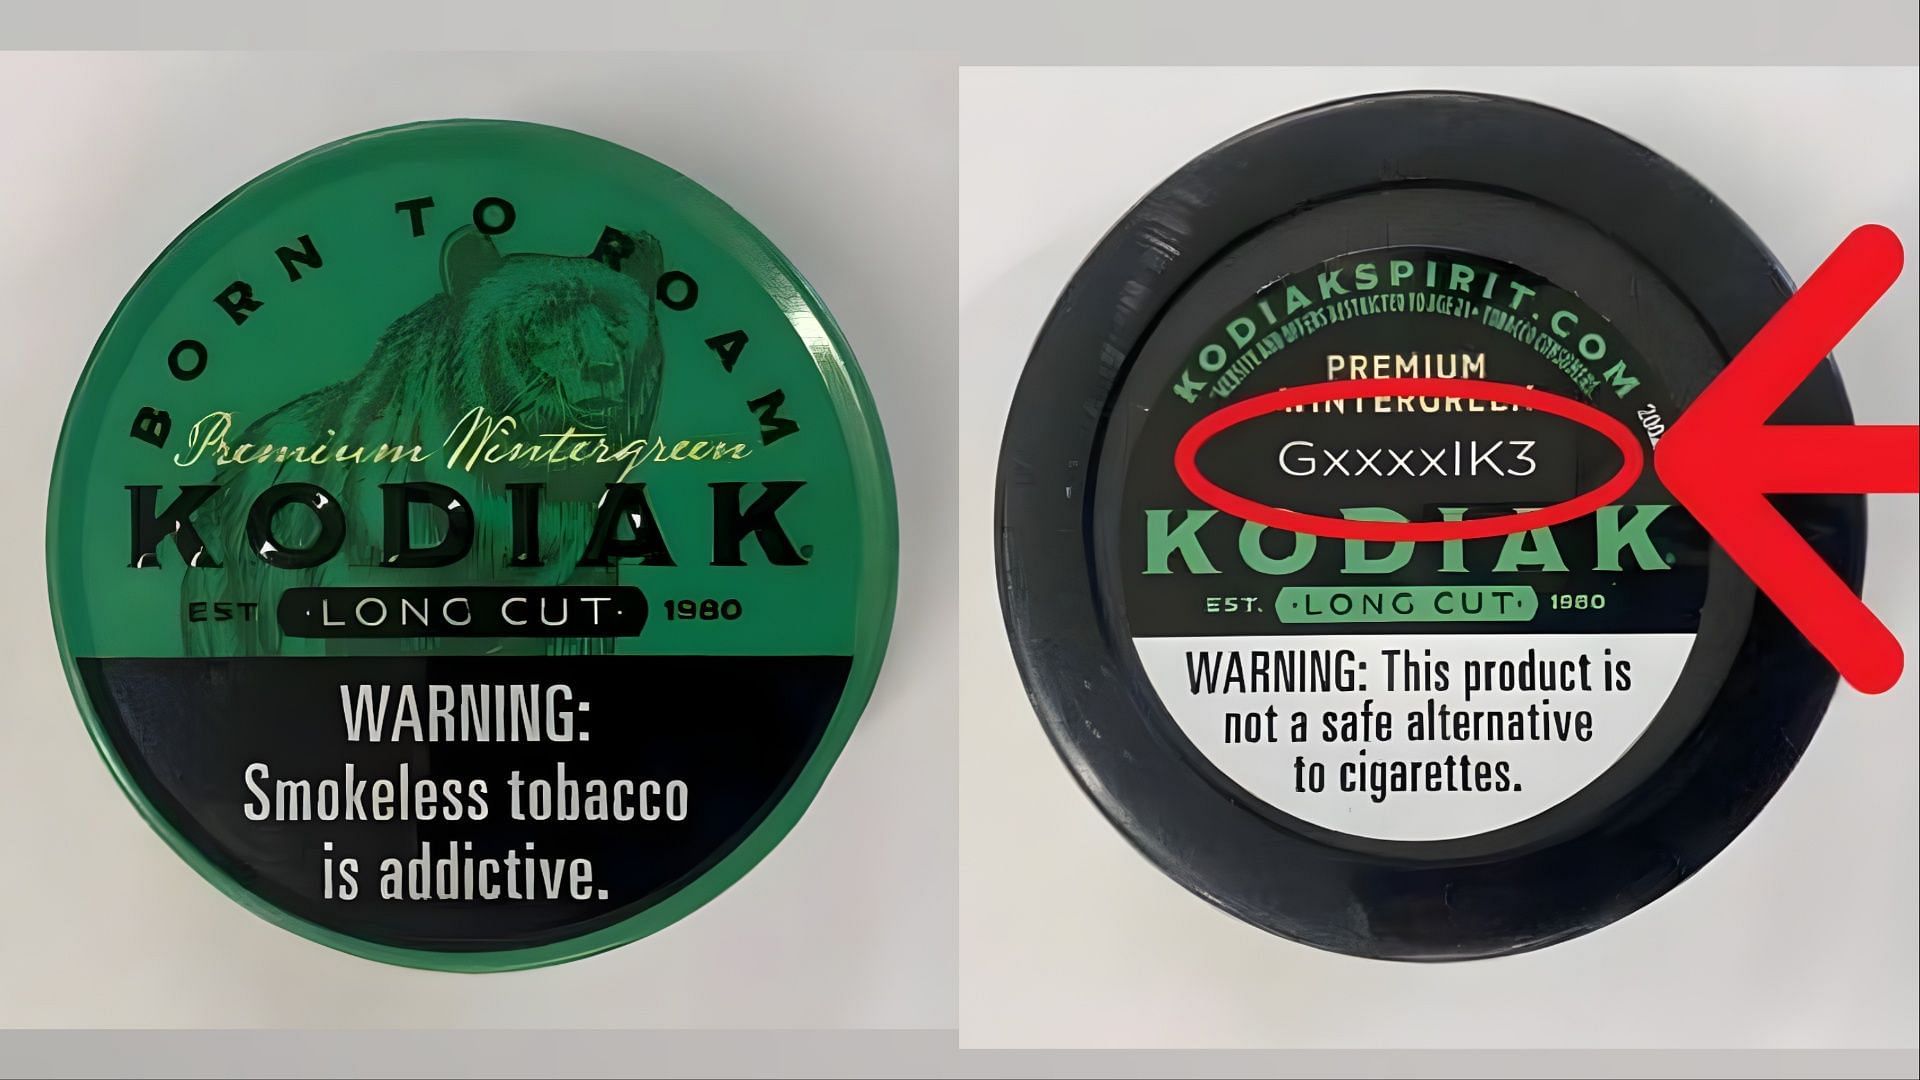 The recalled Kodiak Premium Wintergreen Longcut products should be returned to ASC for a refund (Image via FDA)